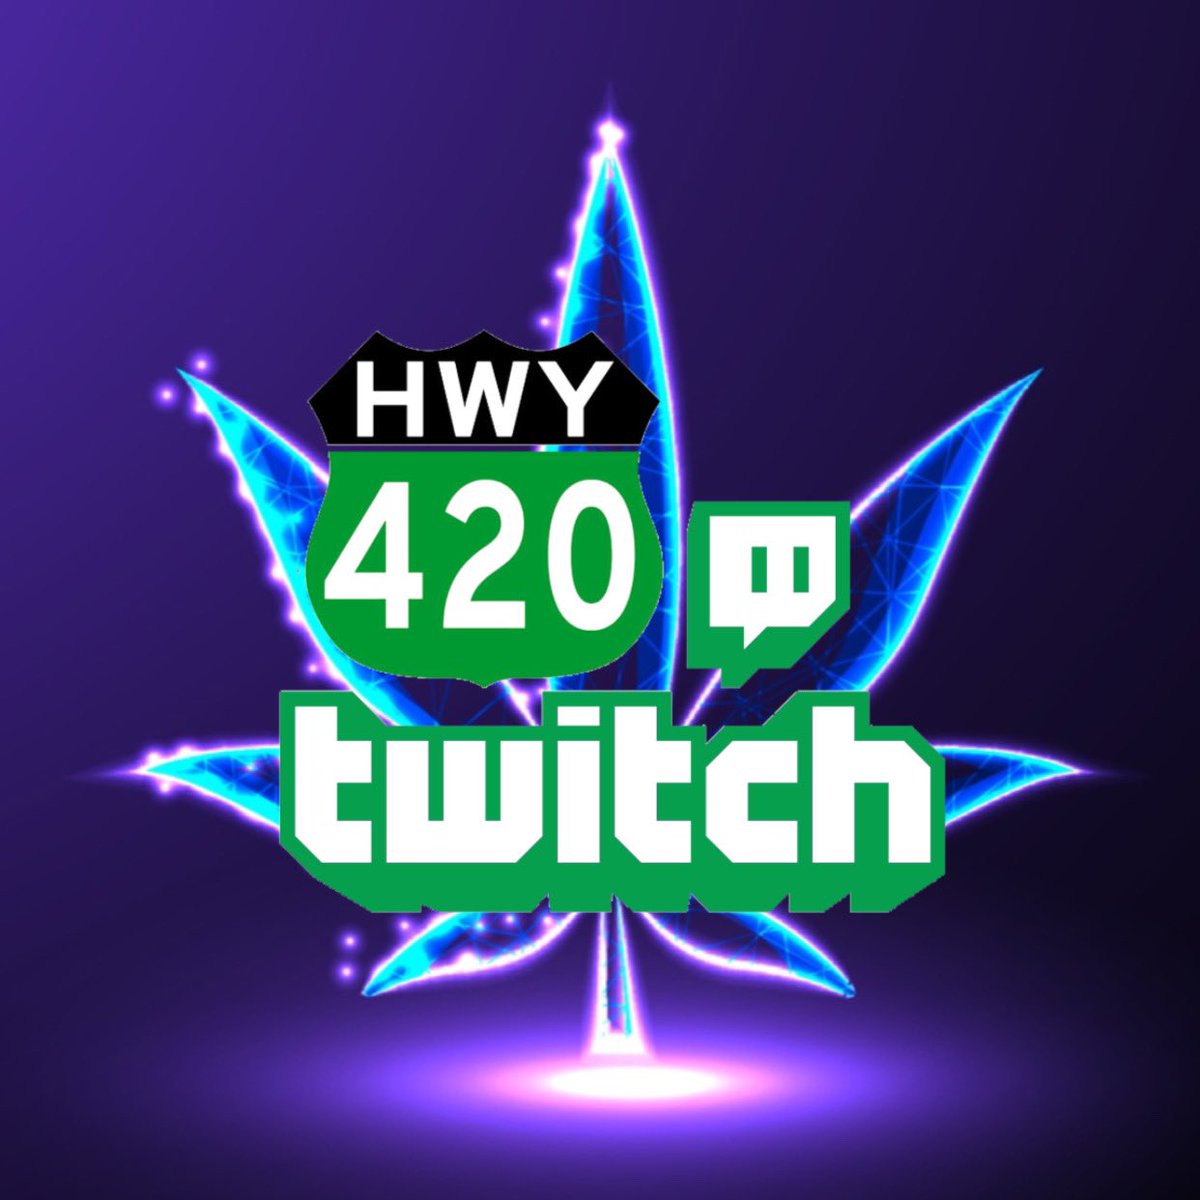 🎮Who wants to grow their channel?🎮

1. Like & Retweet 
2. Comment your #Youtube/#Twitch
3. Follow @420twitch1 on #Twitter
4. Connect & #Follow/#Lurk each other
#SmallStreamersConnect #SupportSmallStreamers #Streamers #twitchtv #TwitchFr #420twitch #SmallStreamerCommunity